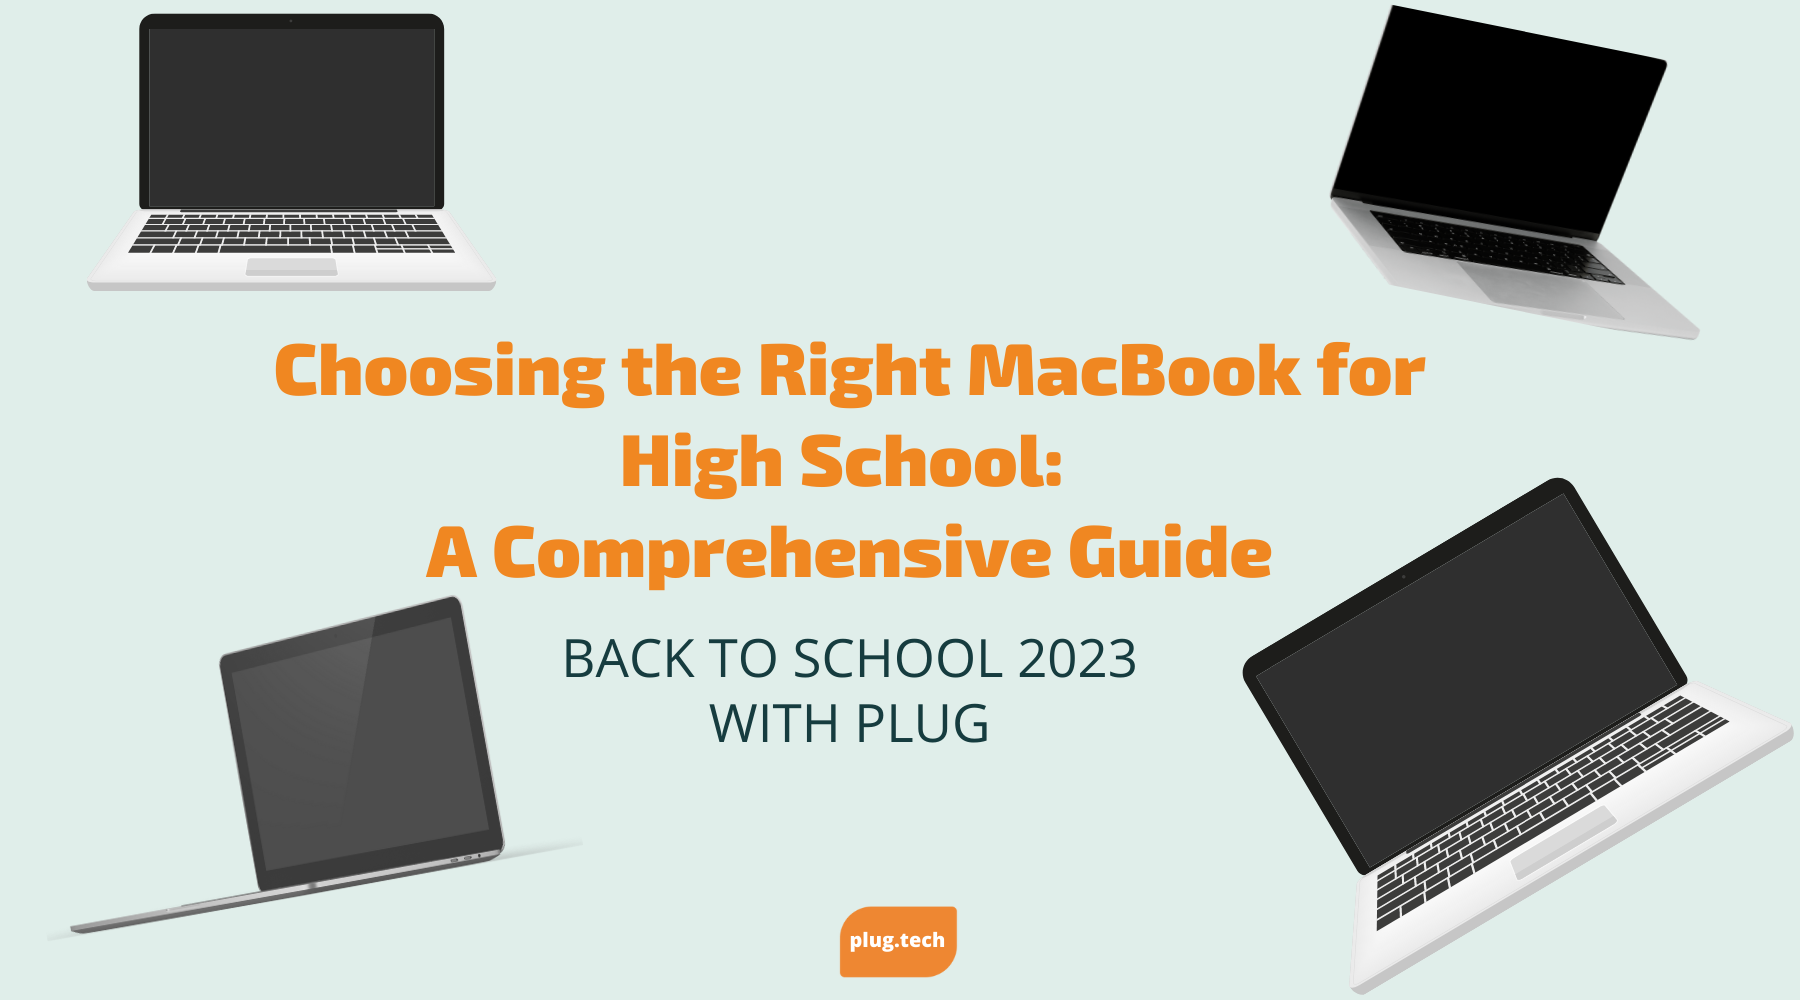 Choosing the Right MacBook for High School: A Comprehensive Guide